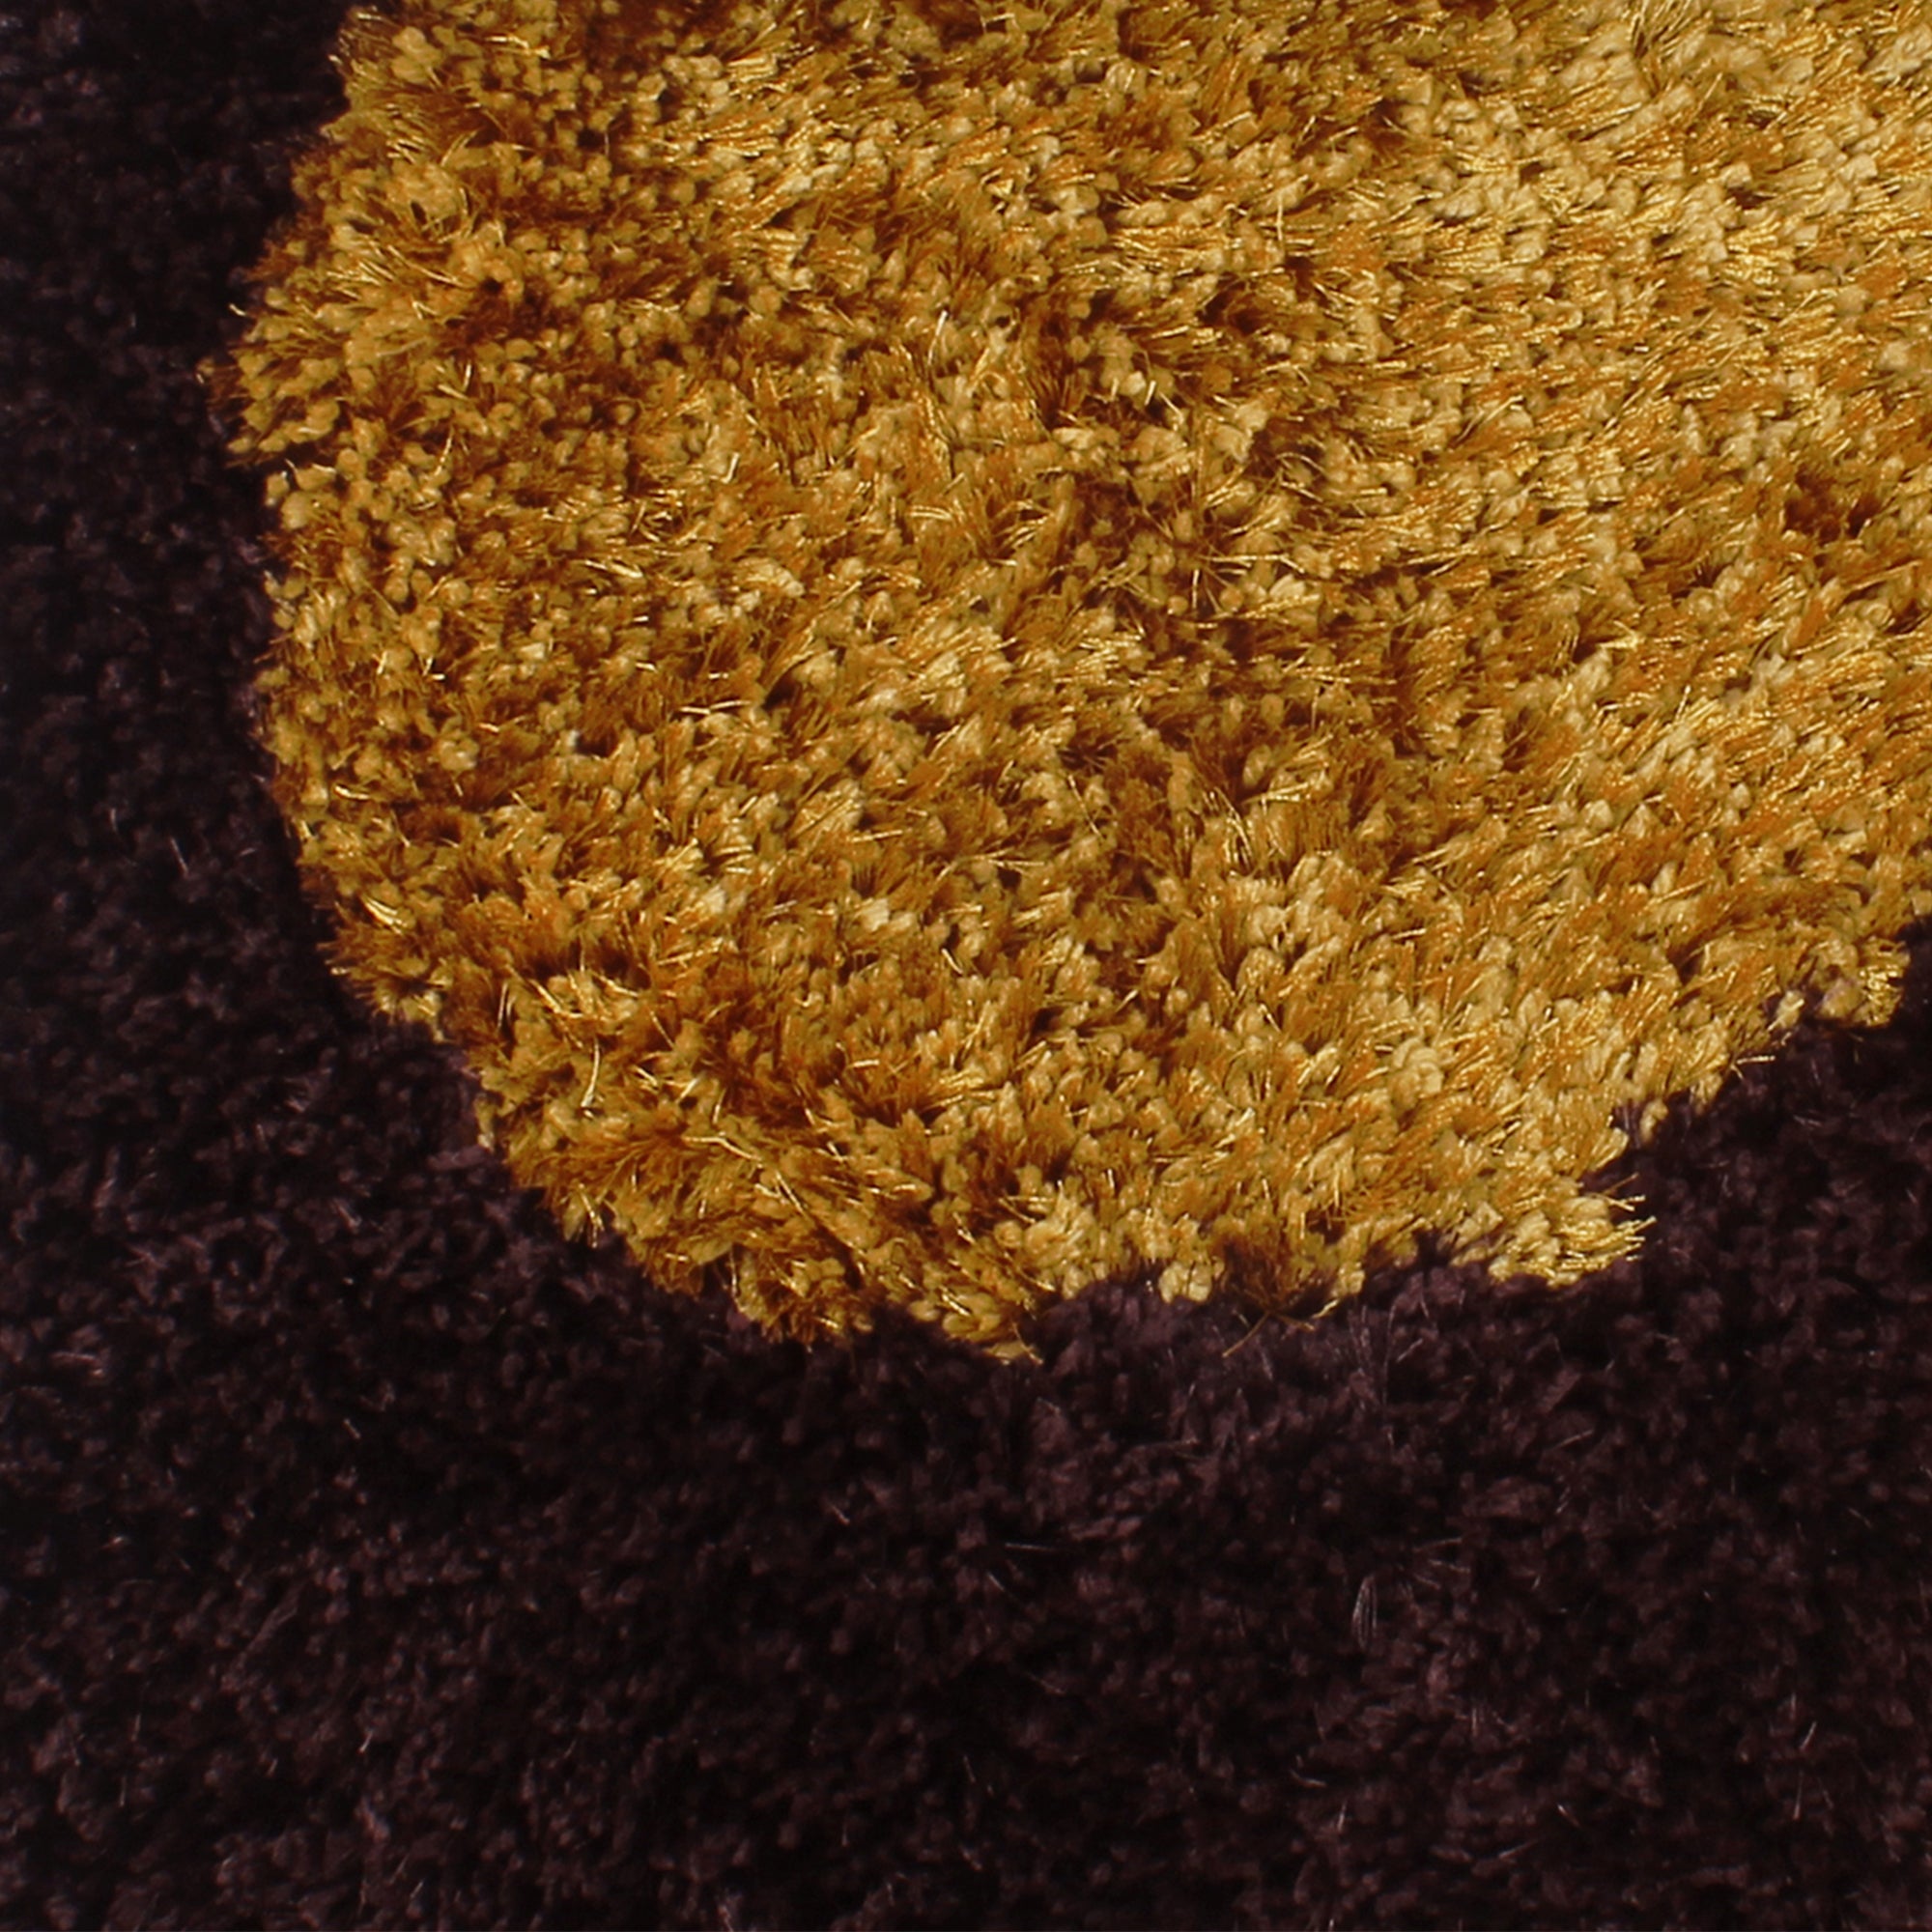 Story@Home Flower Pattern Brown & Yellow 1 PC Carpet